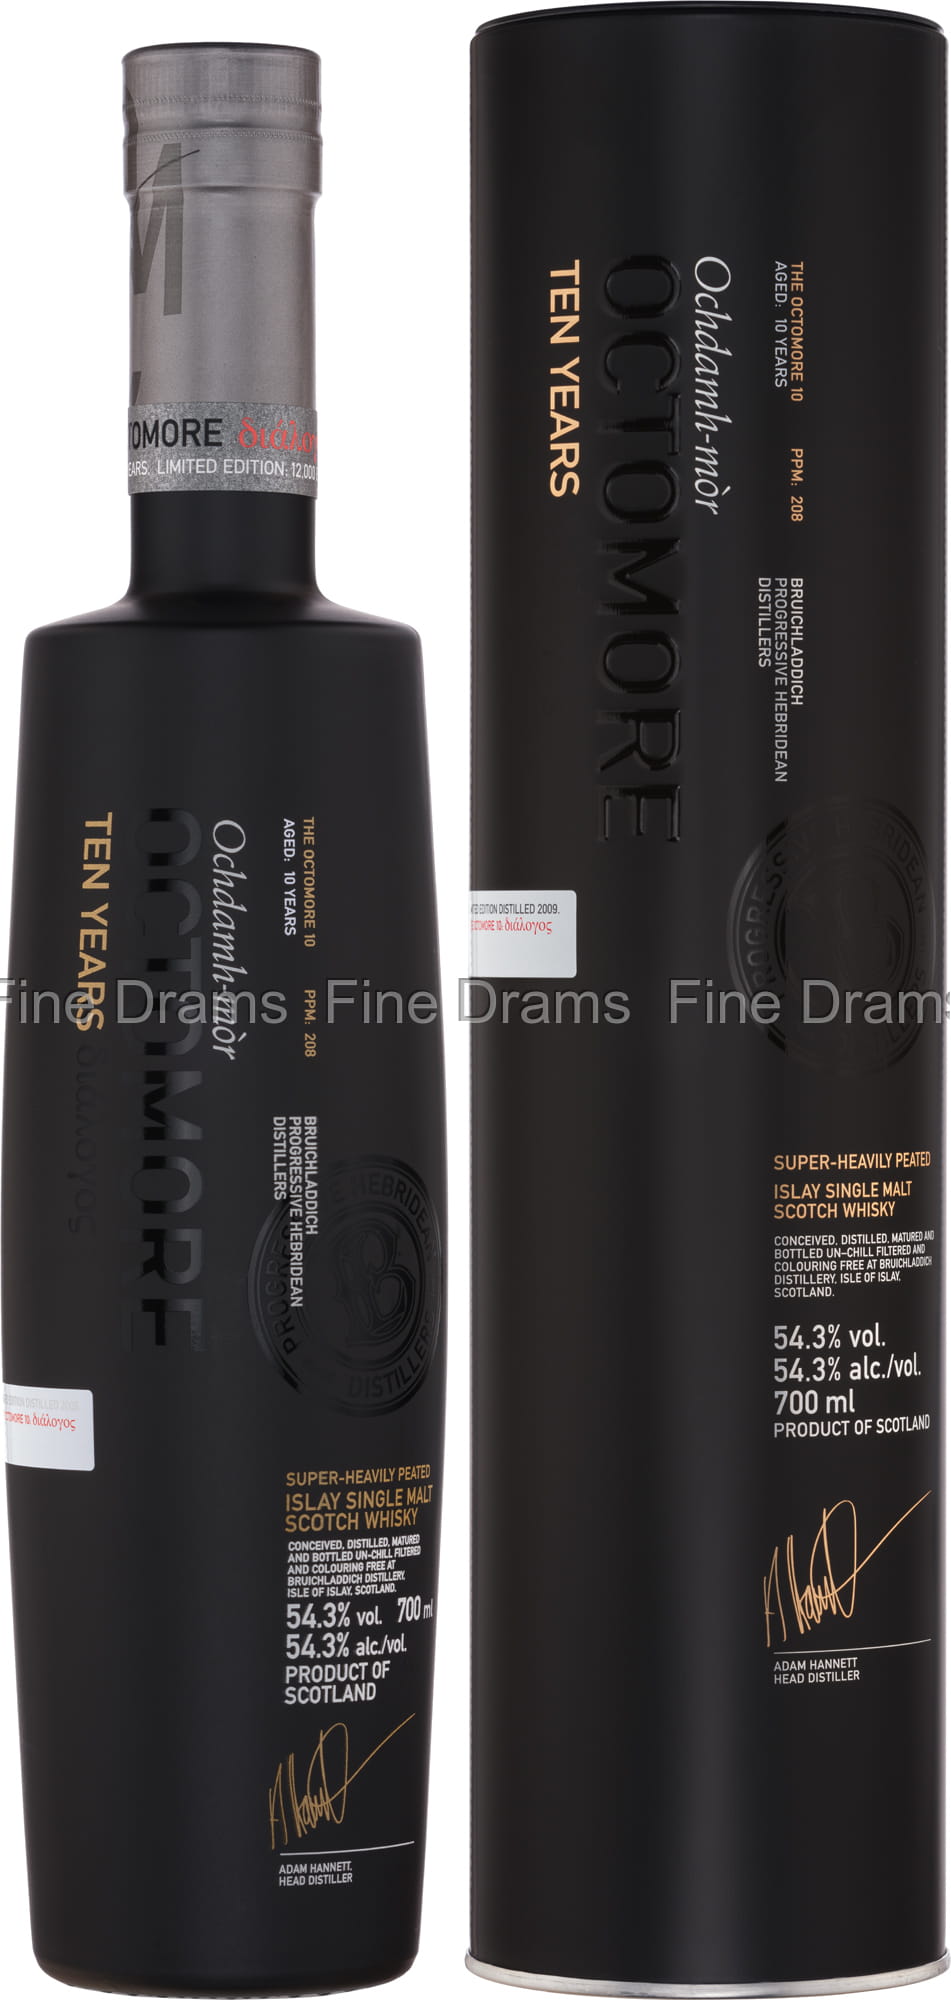 Octomore 10 Year Old 4th Edition Whisky